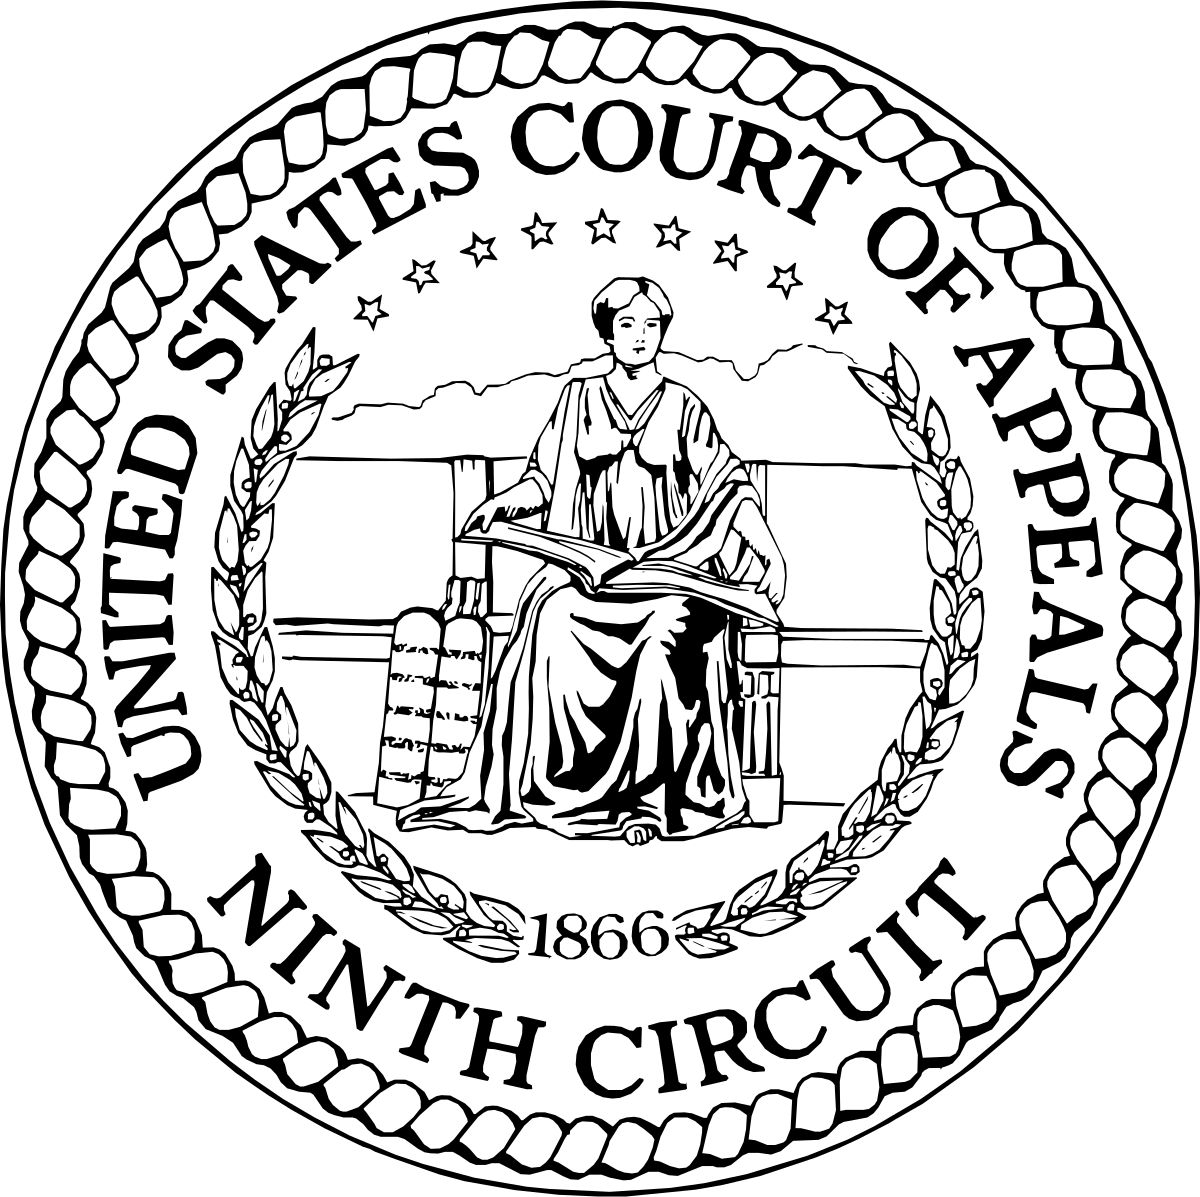 US Court of Appeals 9th Circuit